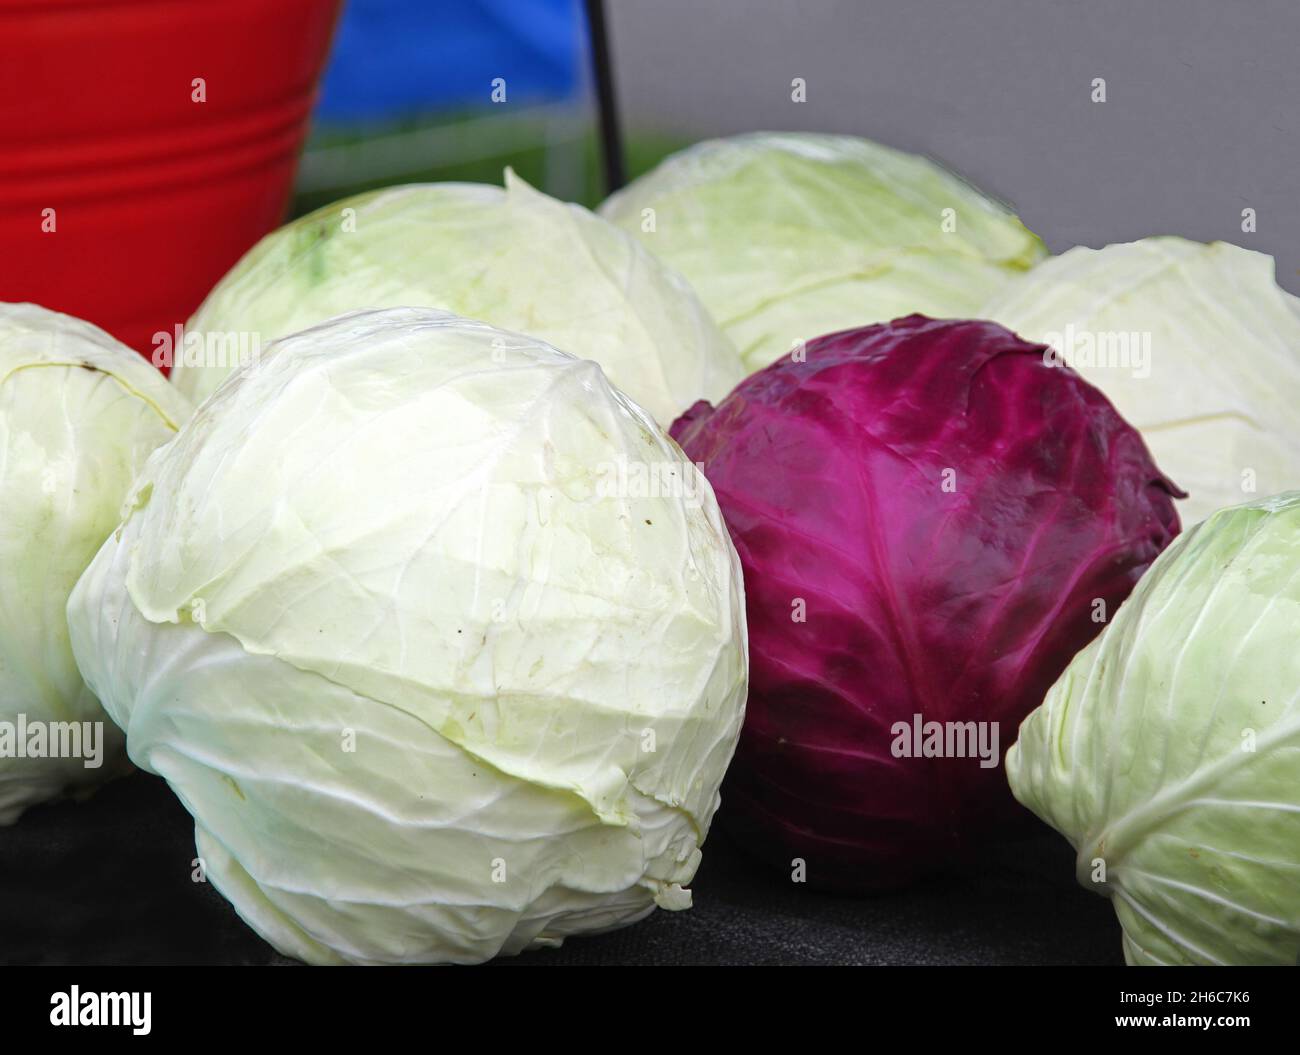 Harvest of white and red cabbage on table Stock Photo